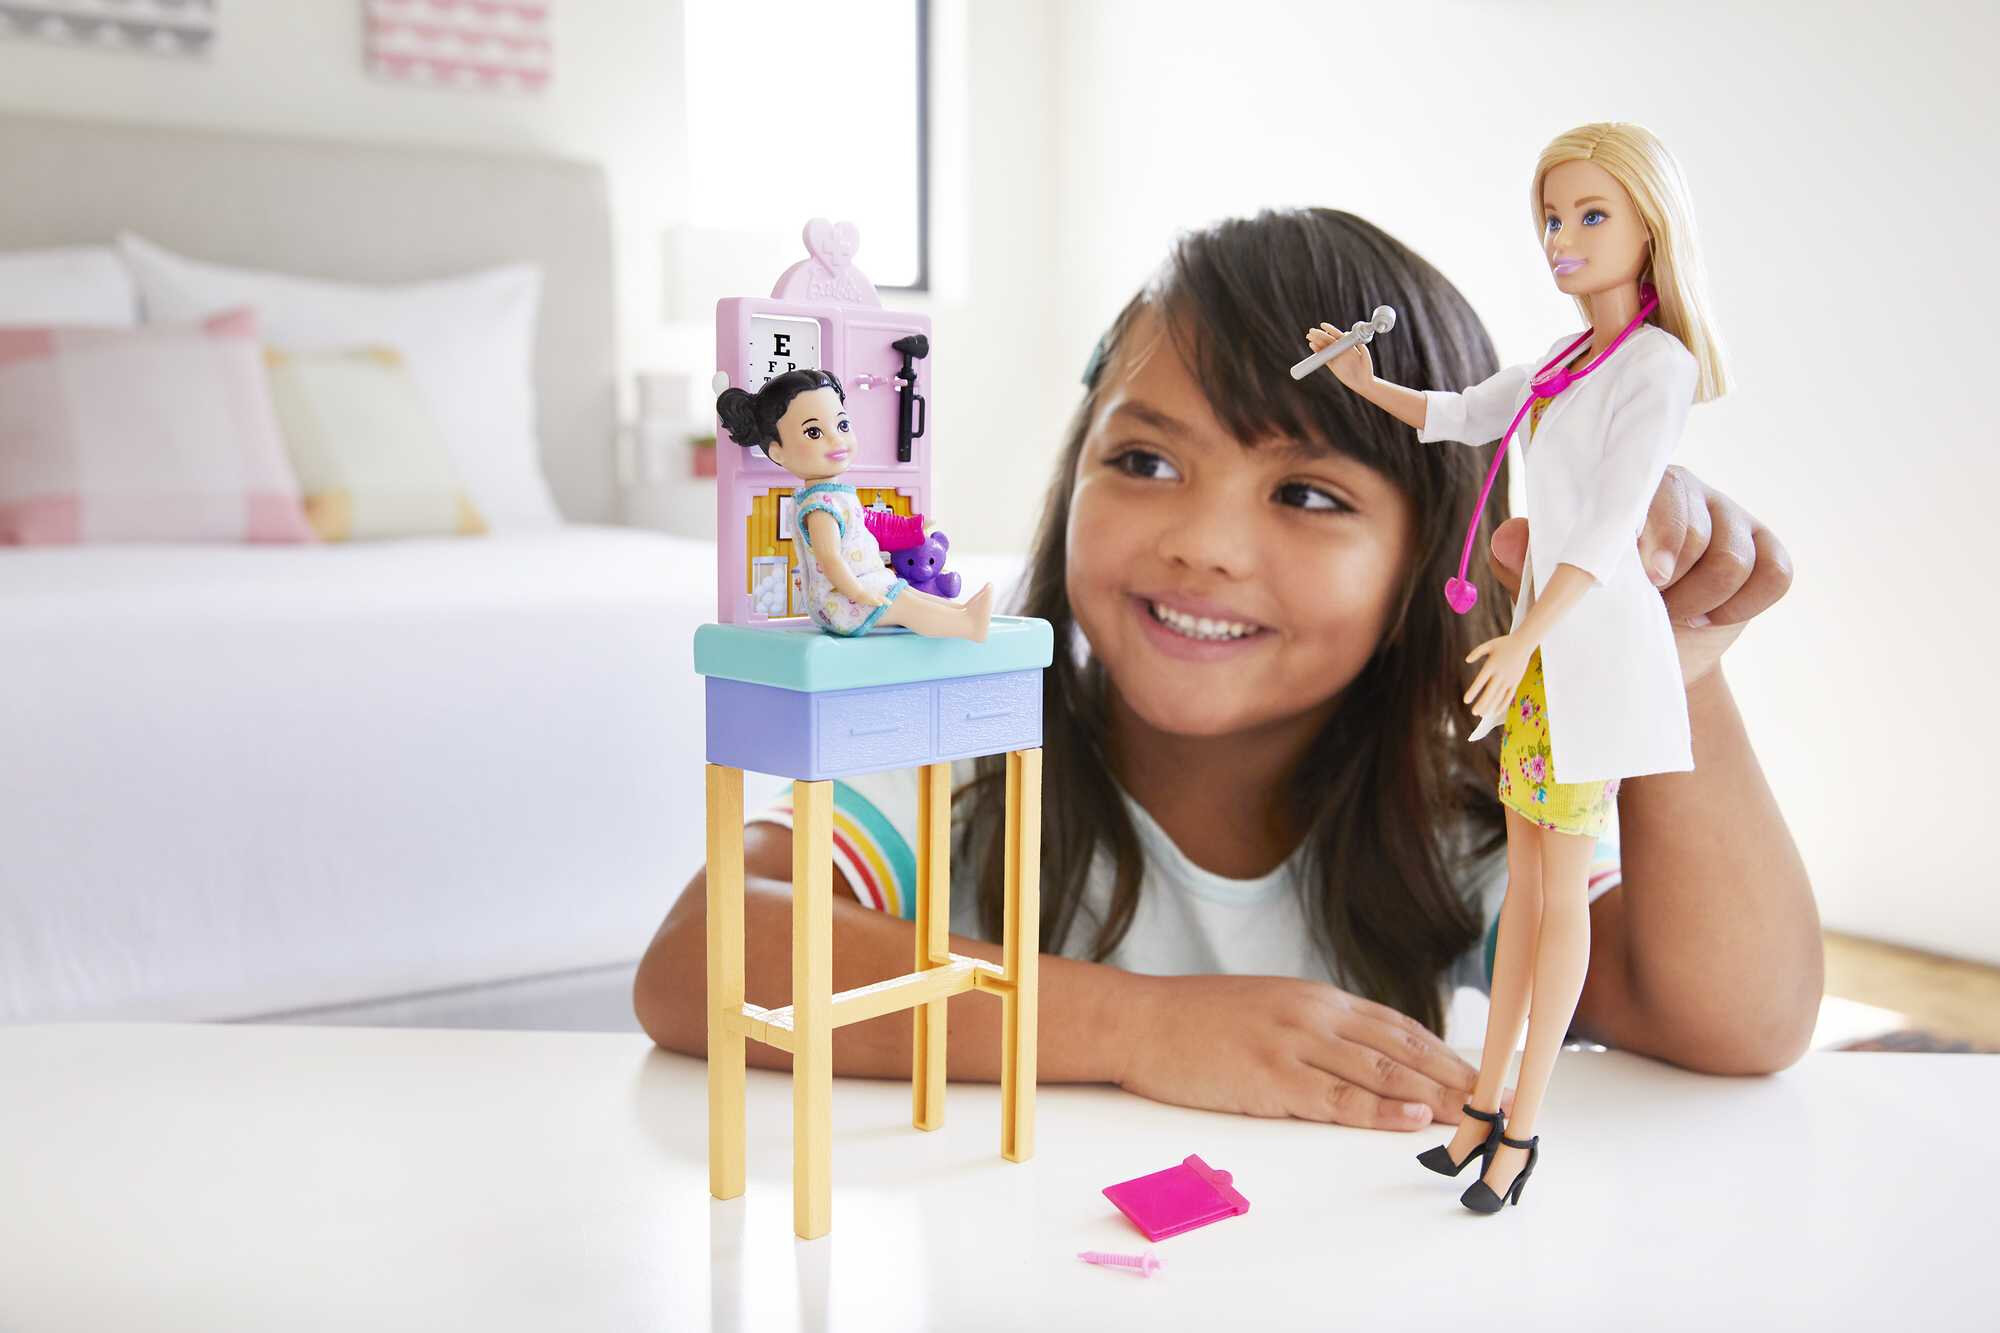 Barbie Careers Pediatrician Playset with Blonde Fashion Doll, 1 Small Doll, Furniture & Accessories - image 3 of 7